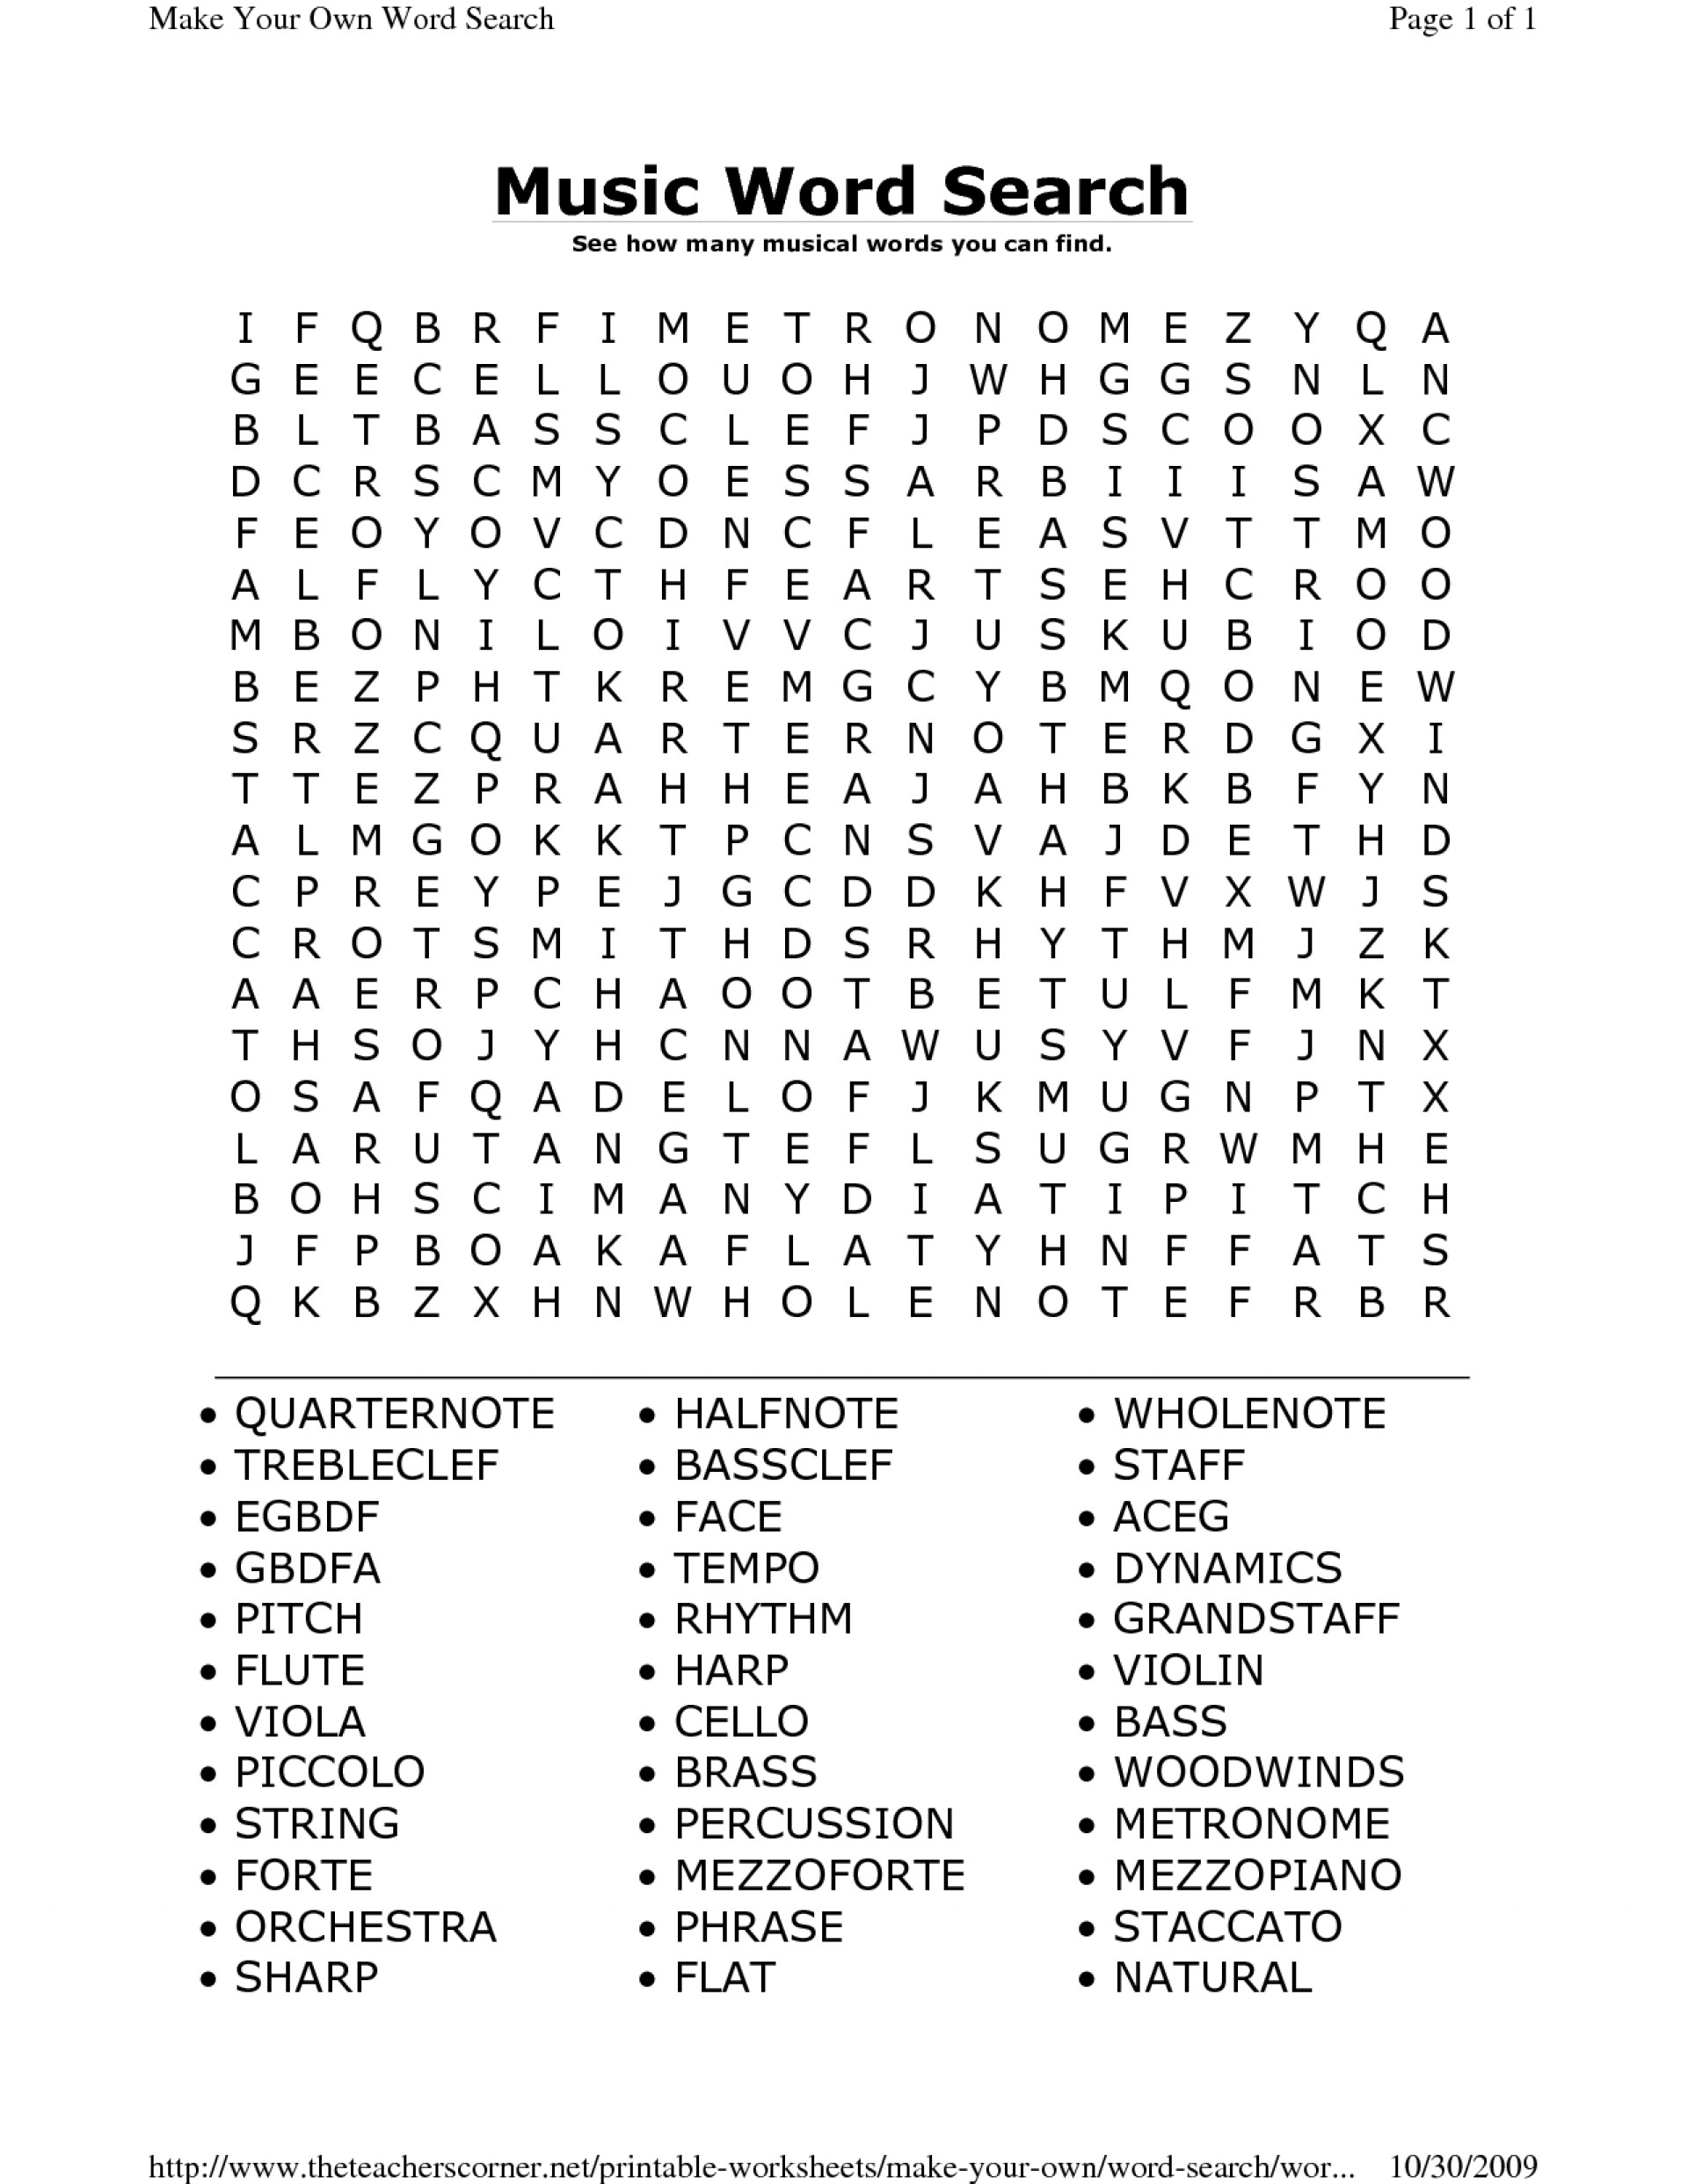 Music Theory Crossword Wordmint Printable Crossword Puzzles About